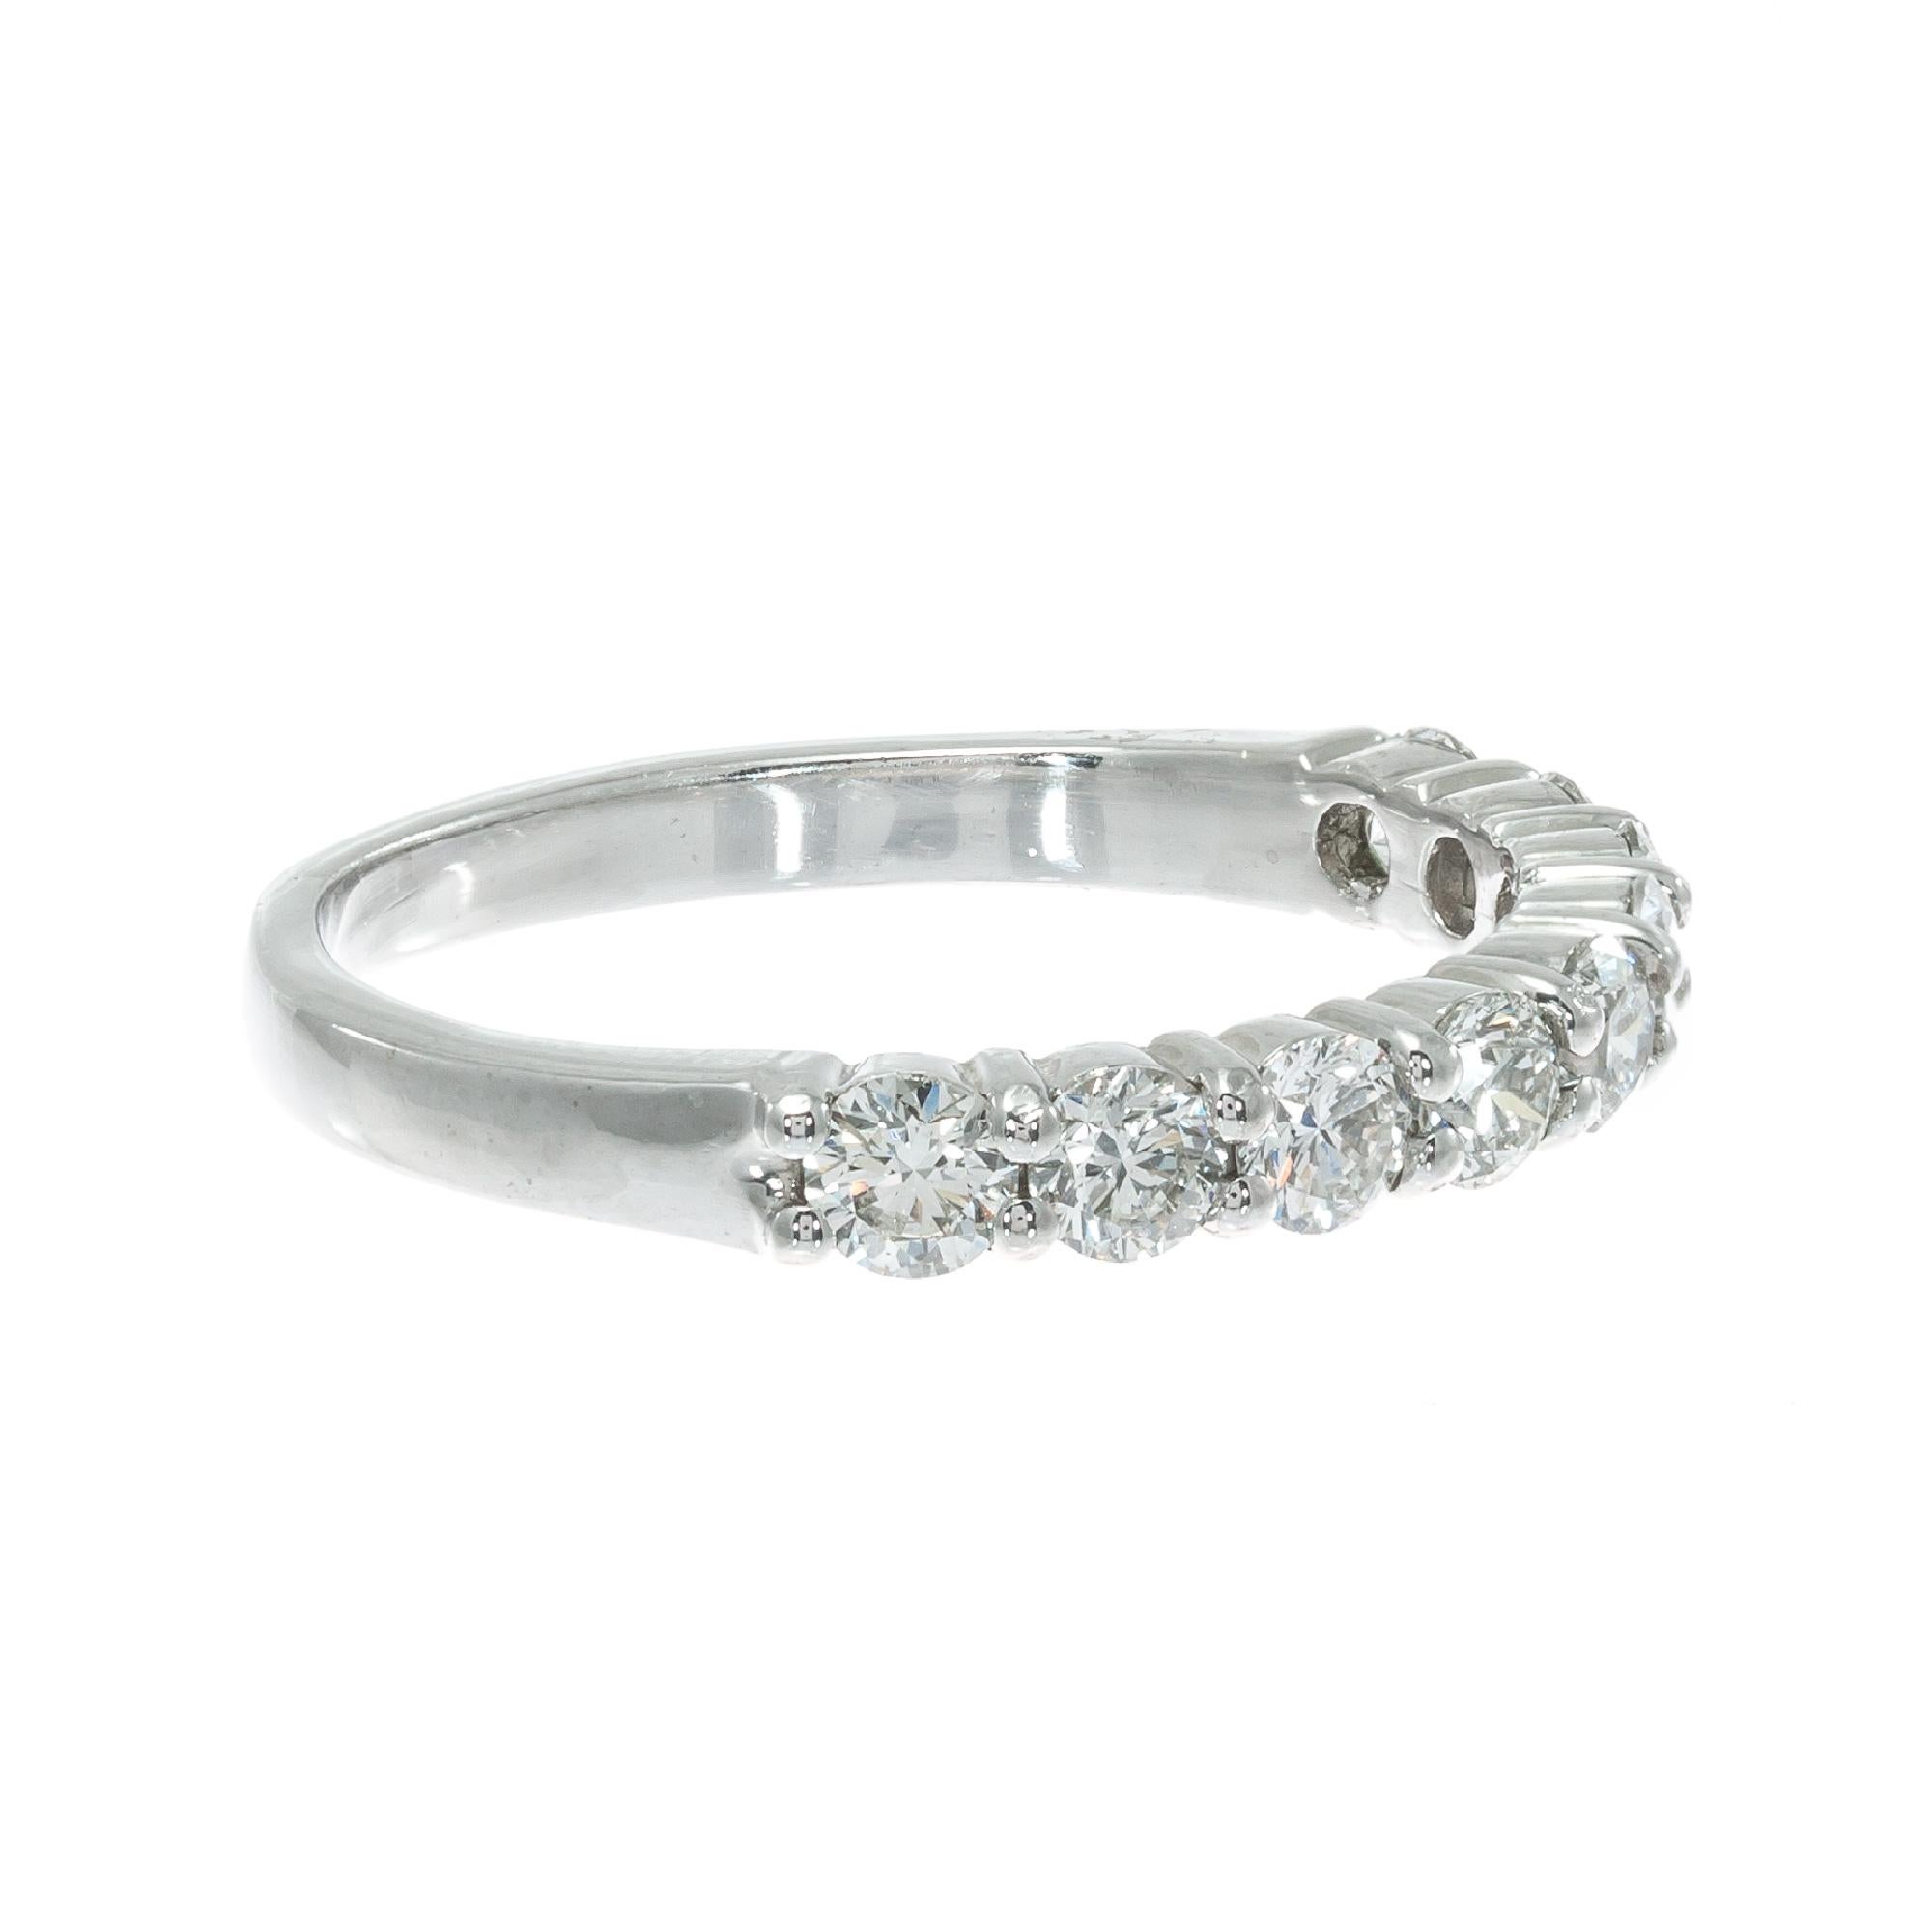 Nine bright sparkly ideal cut diamonds in a platinum wedding band ring made in the Peter Suchy Workshop

9 round brilliant cut F VS diamonds, Approximate .75cts 
Size 7 and sizable 
Platinum 
Stamped: PLAT
3.9 grams
Width at top: 2.96mm
Height at